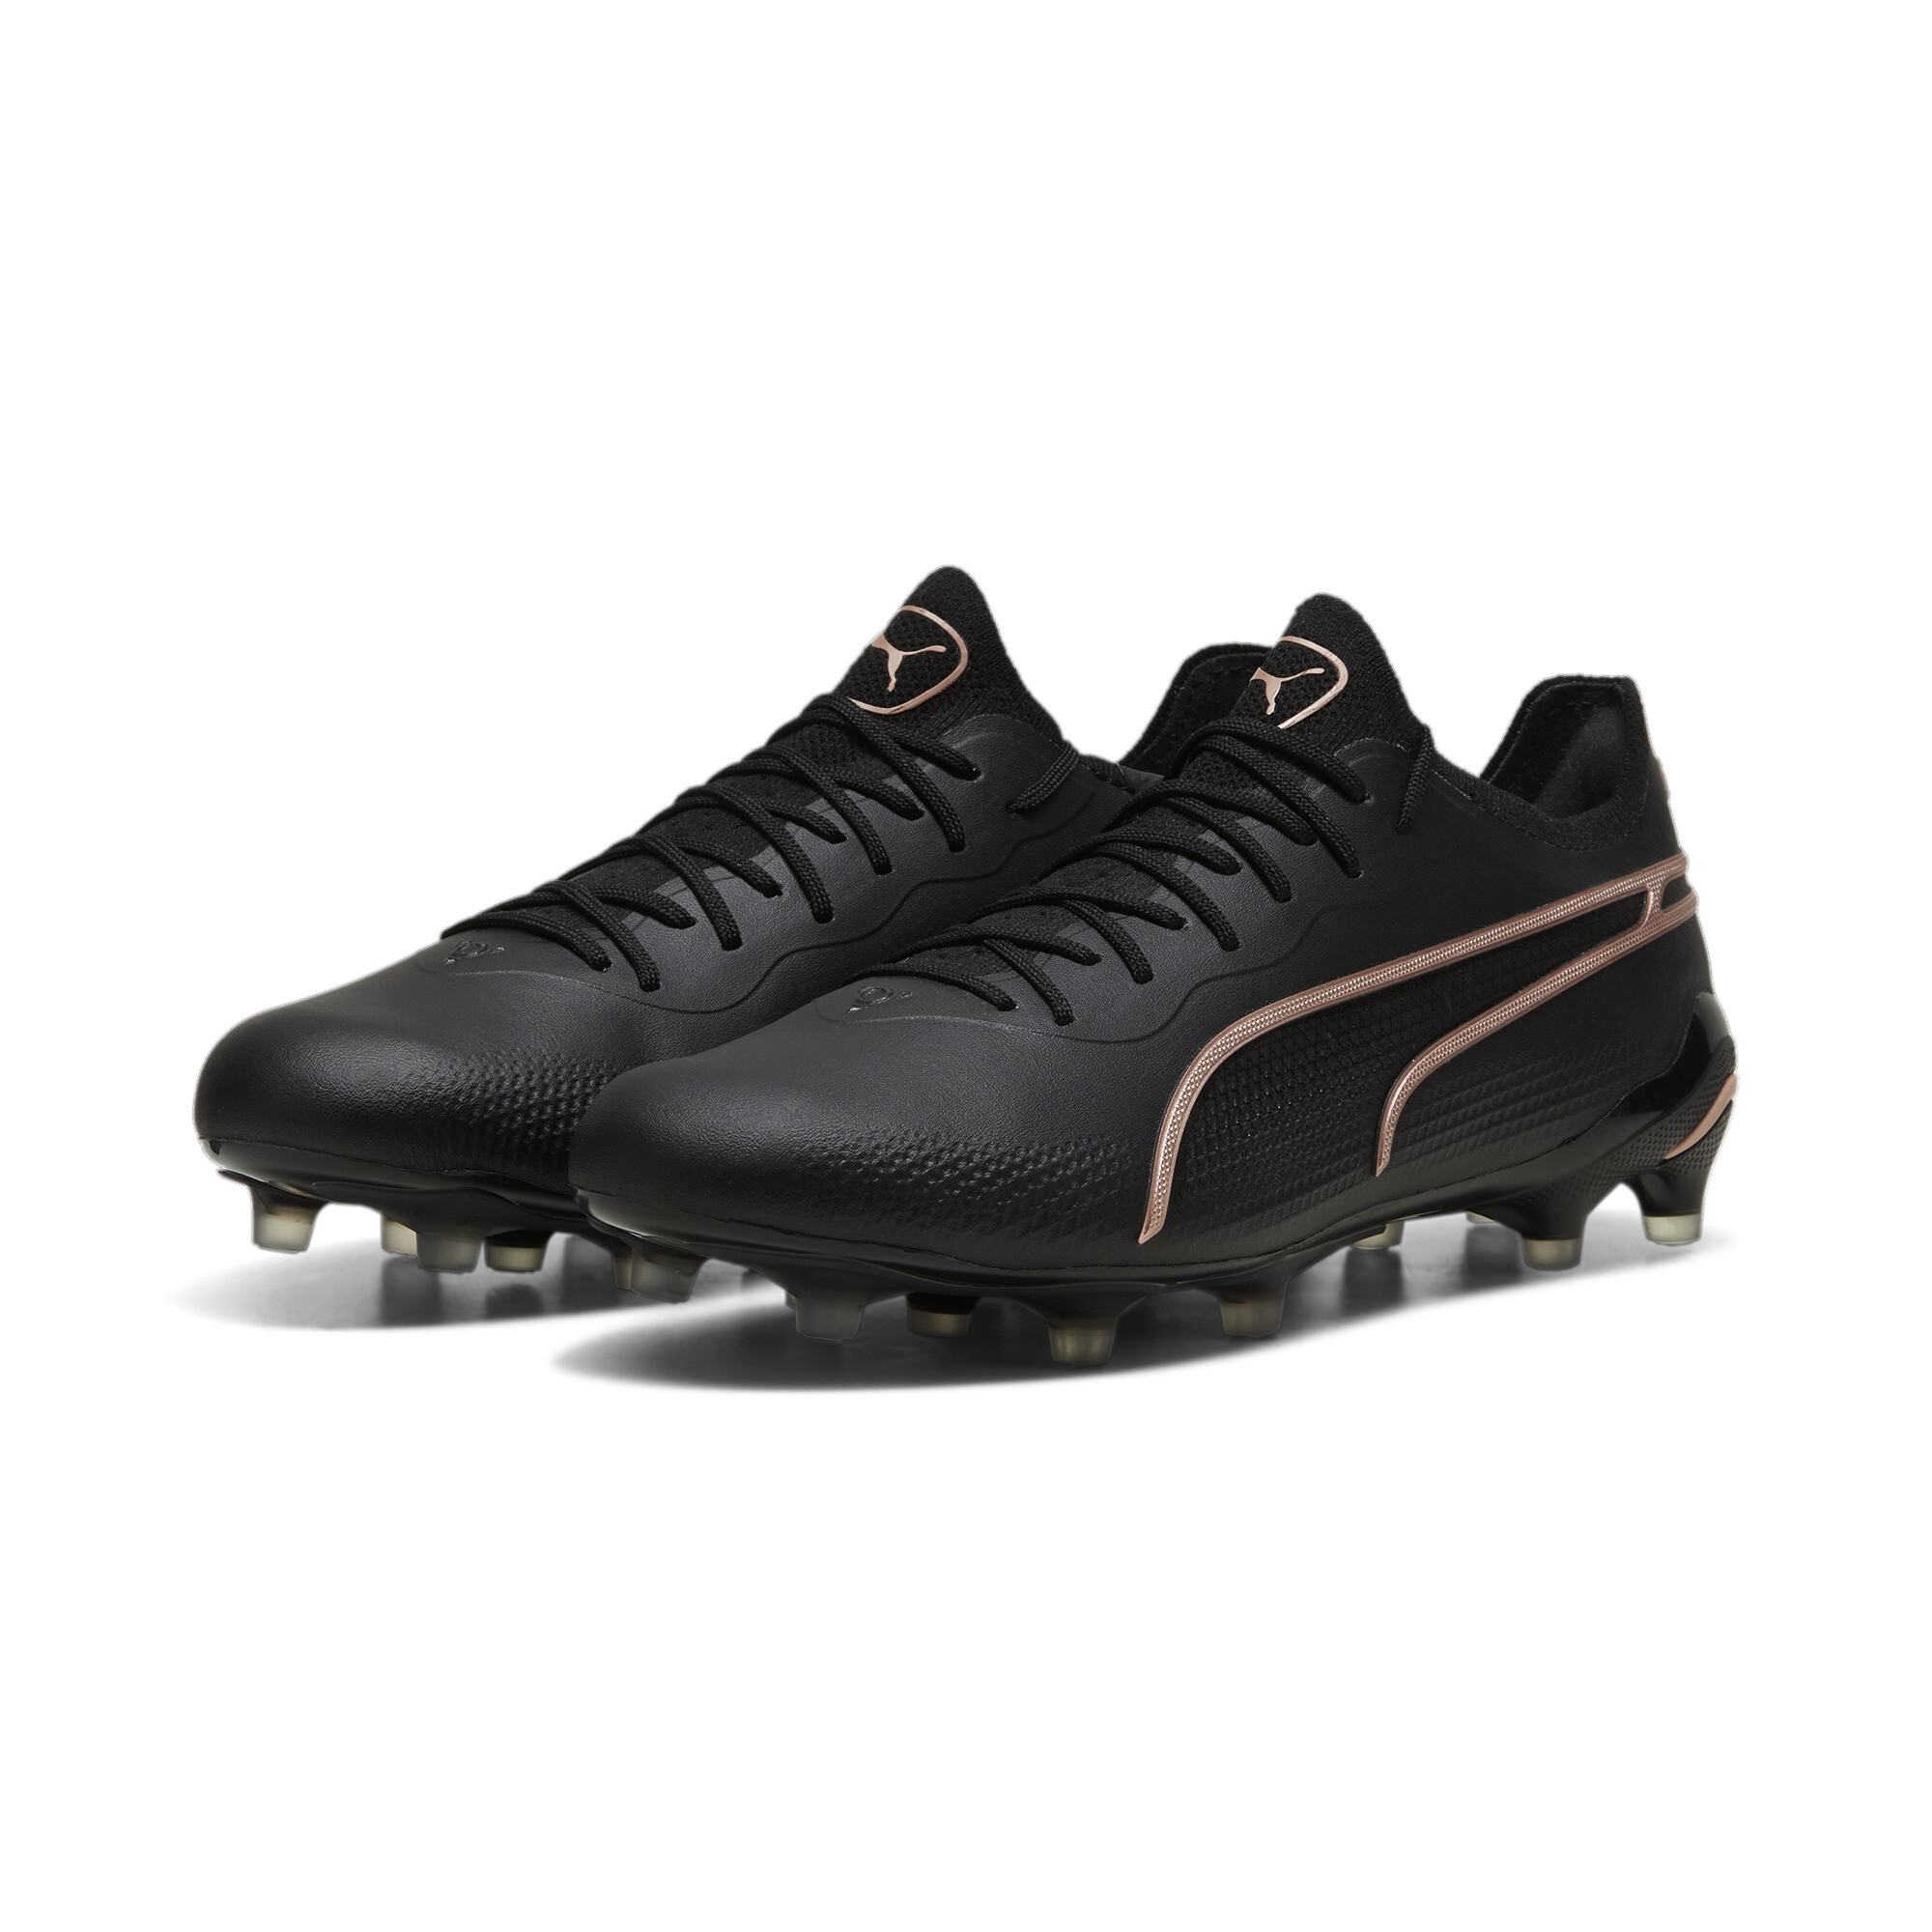 Men's PUMA KING ULTIMATE FG/AG Football Boots In Black, Size EU 46